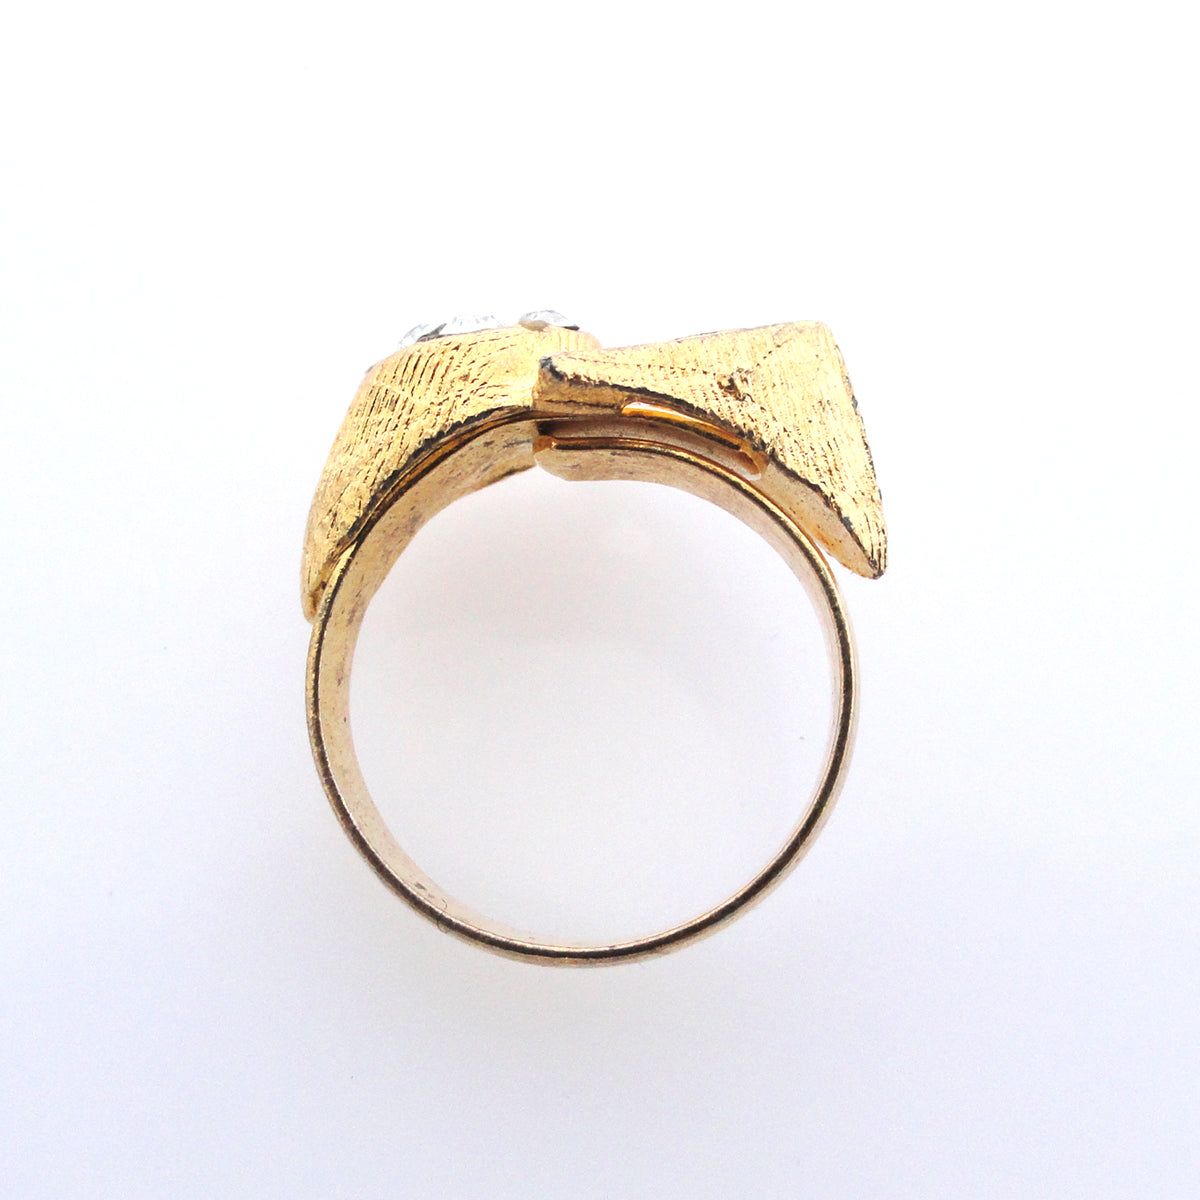 Vintage gold triangle and rhinestone ring by Jenny Dayco side view